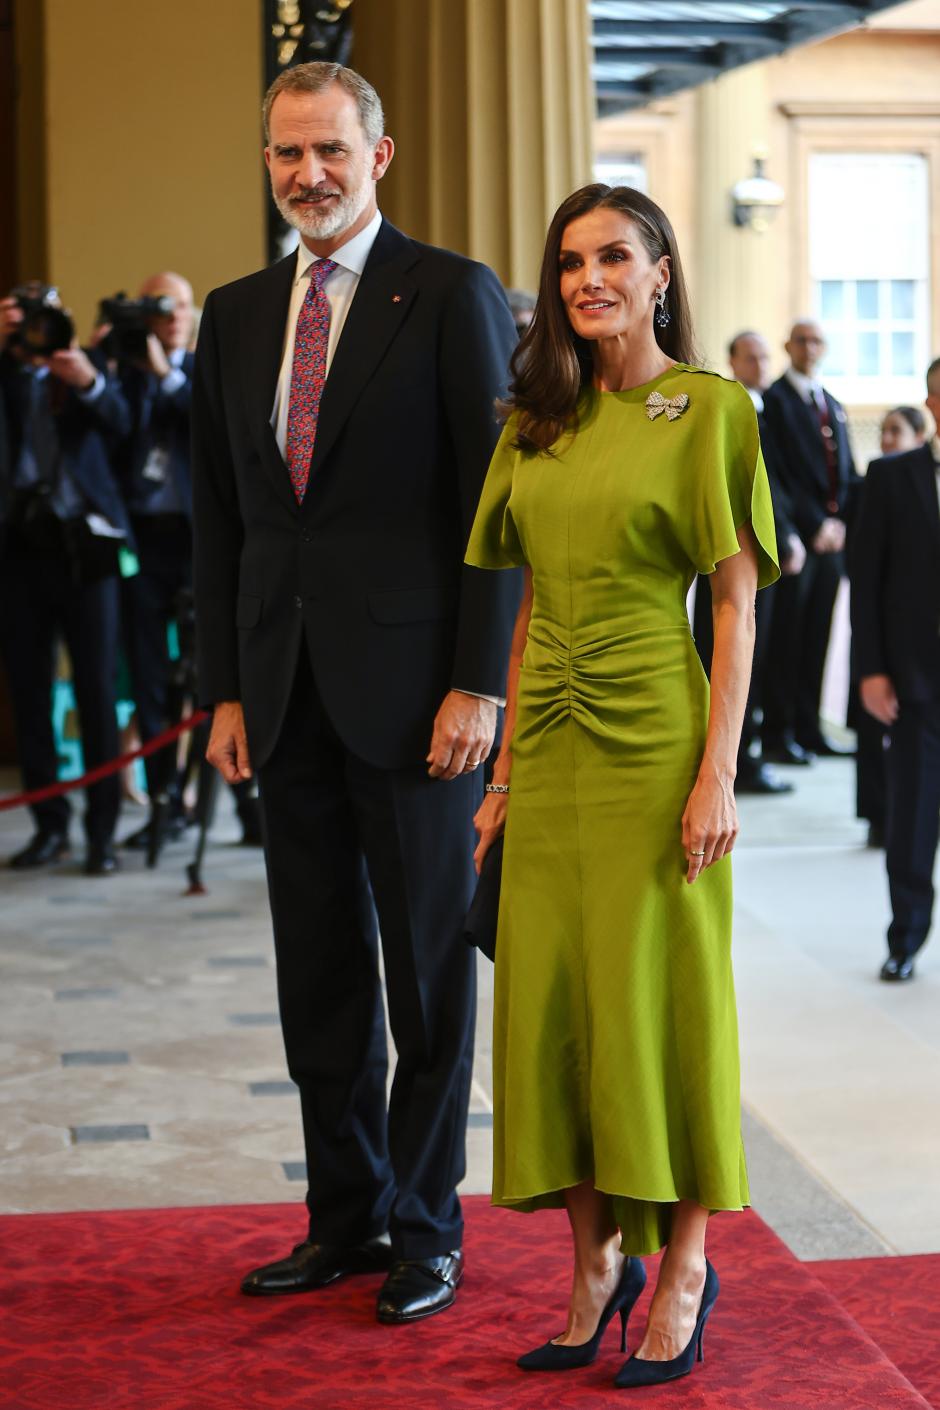 Spanish King Felipe and Queen Letizia during the Coronation of King Charles III in London, UK - 06 May 2023